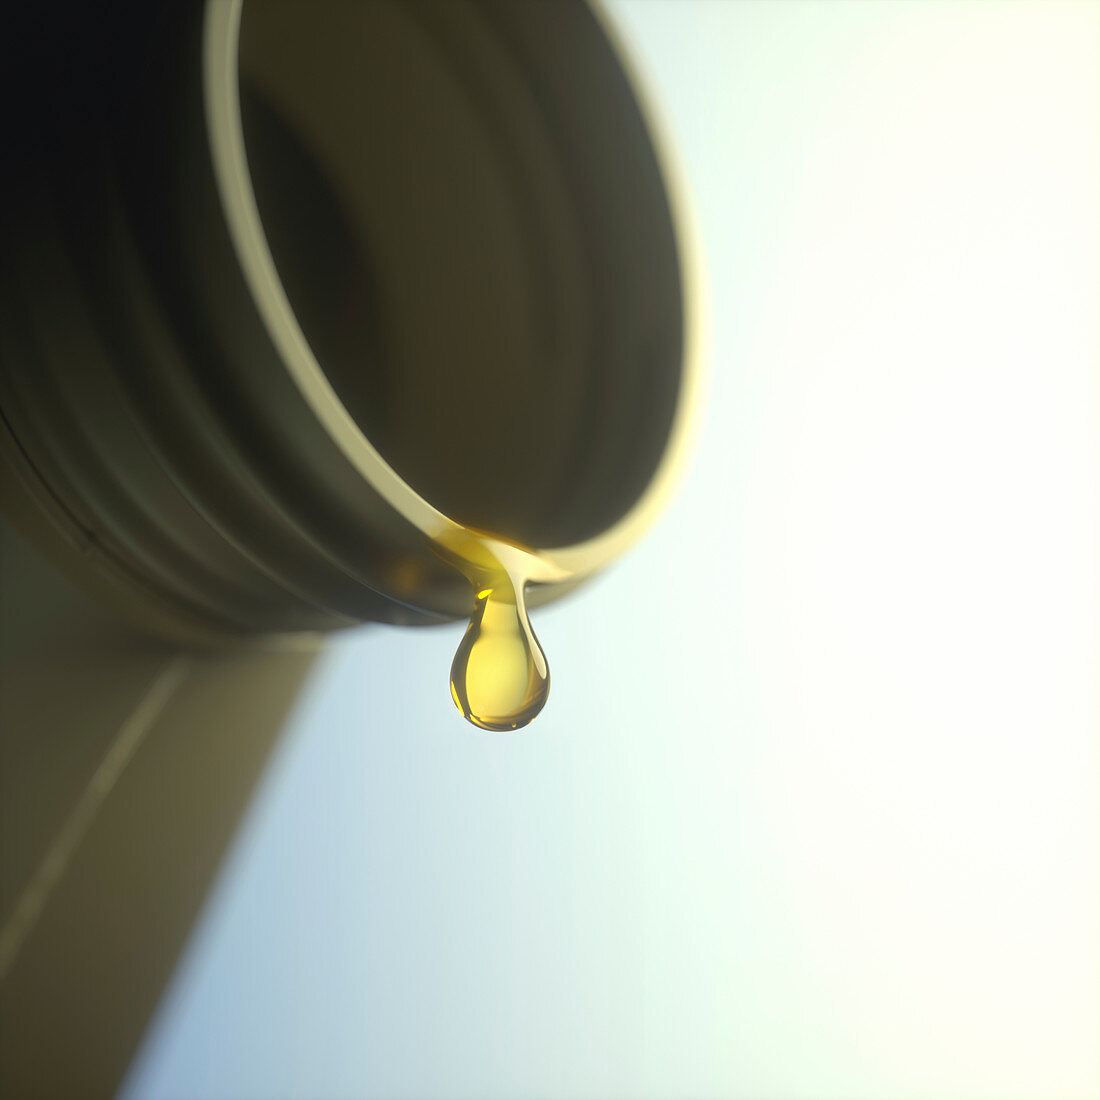 Engine oil dripping from a bottle, illustration